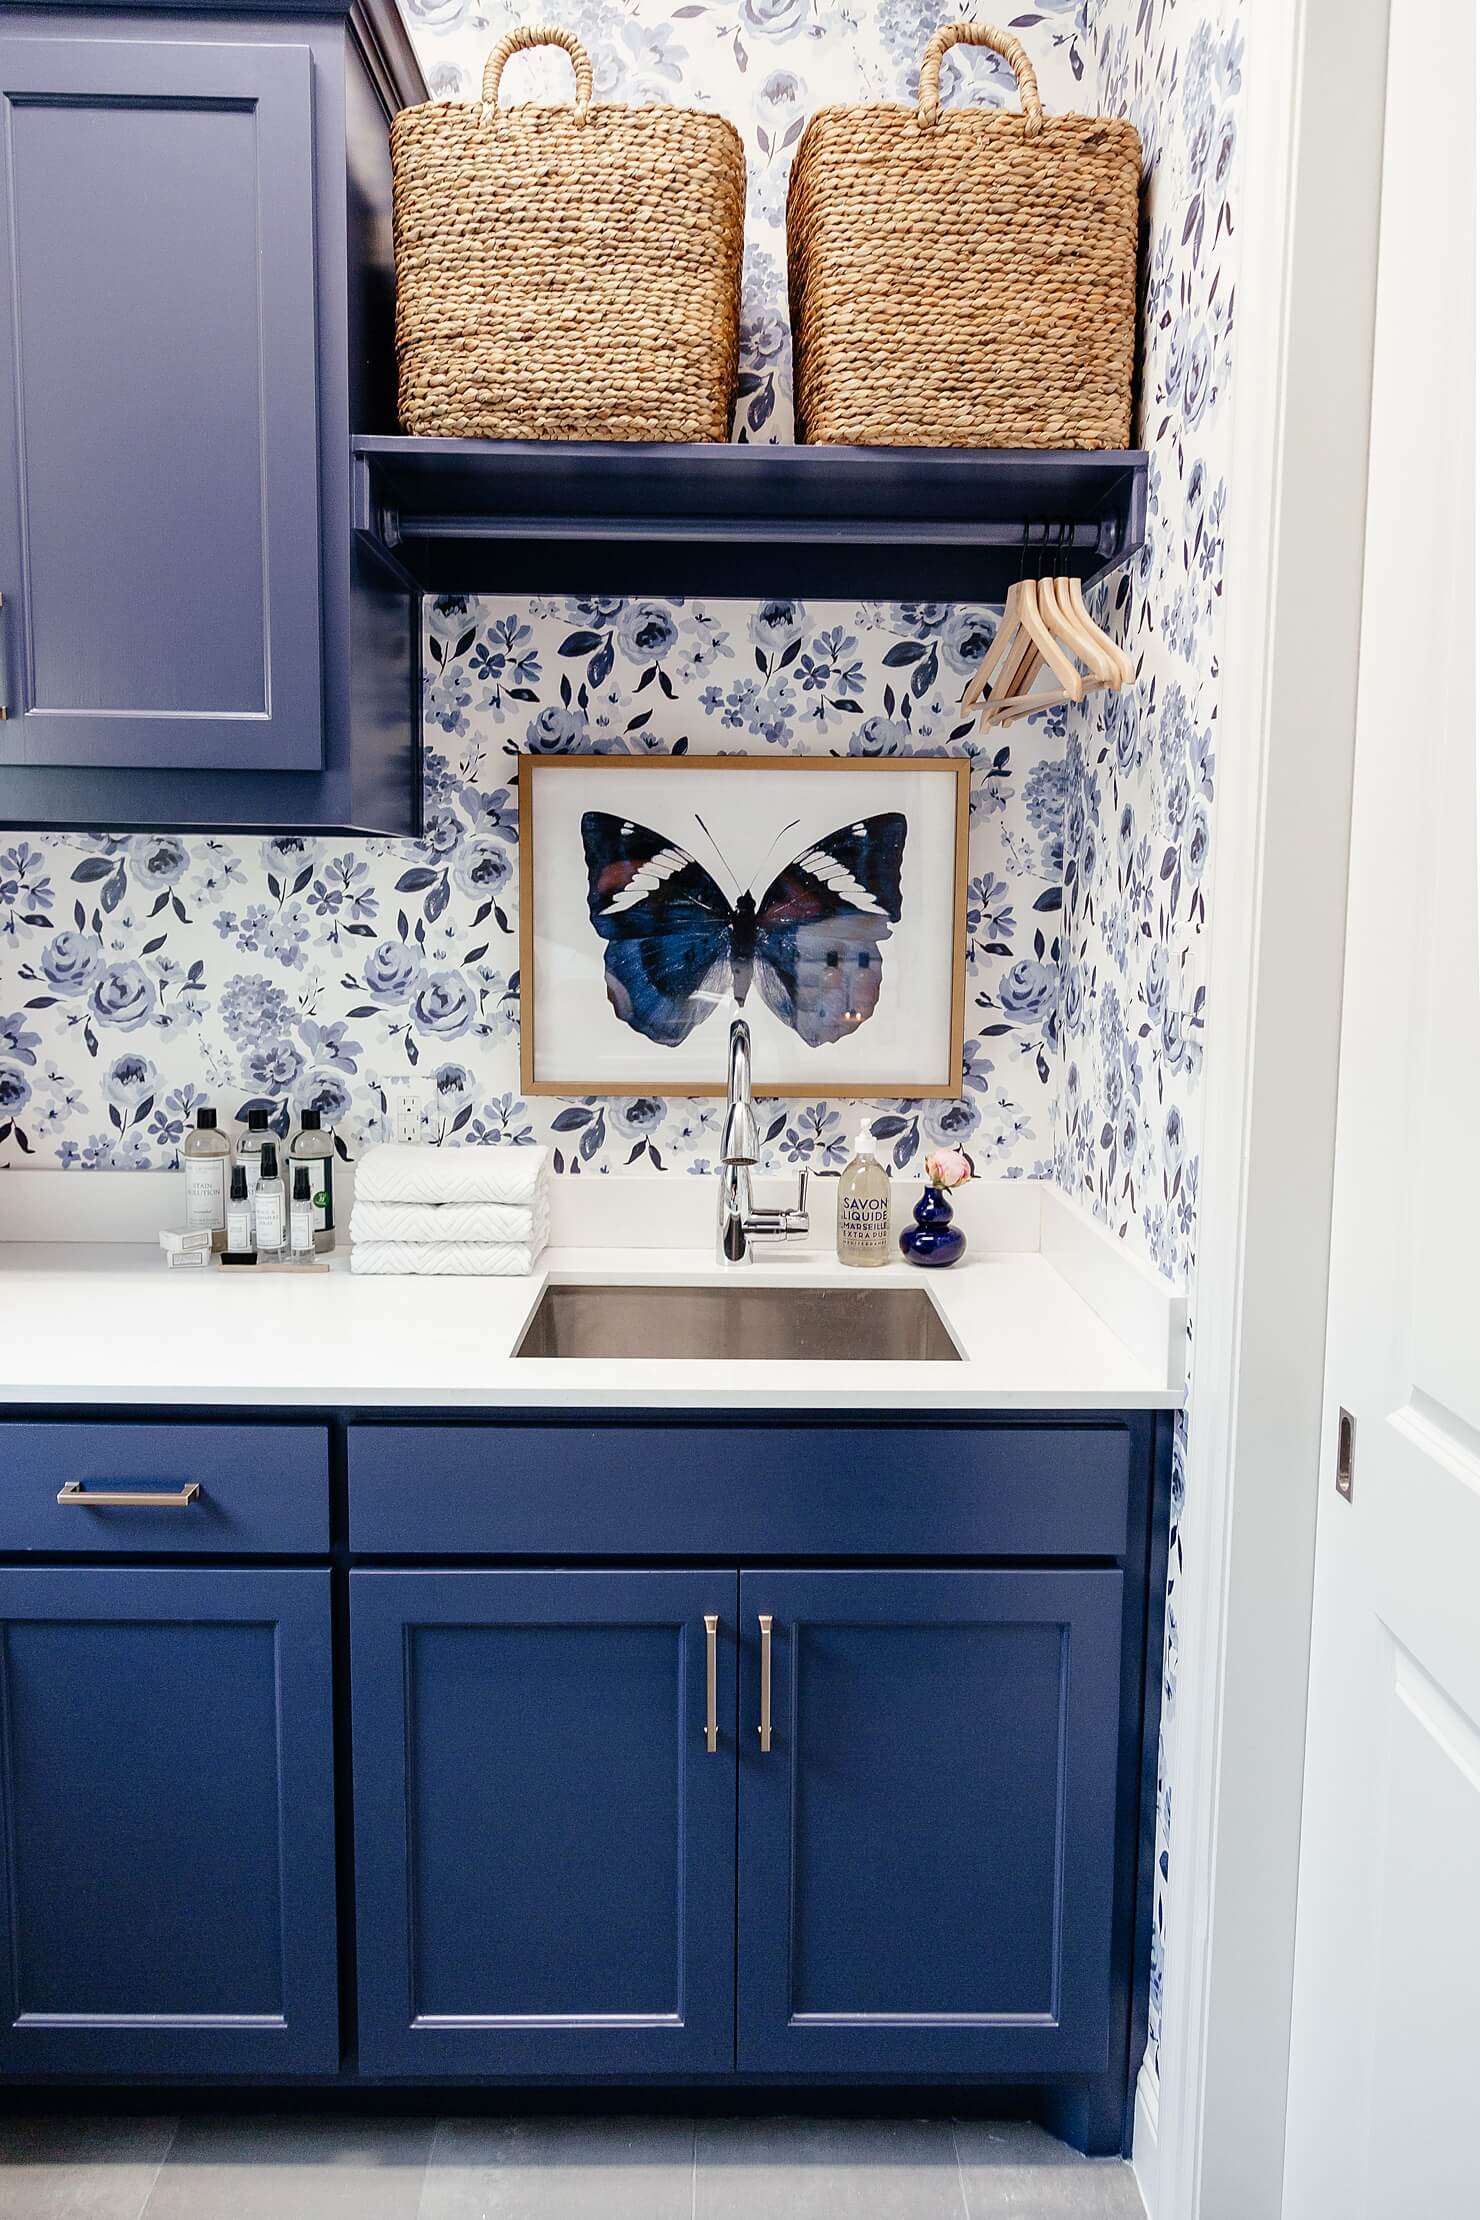 brighton keller laundry room blue and white wallpaper blue painted cabinets